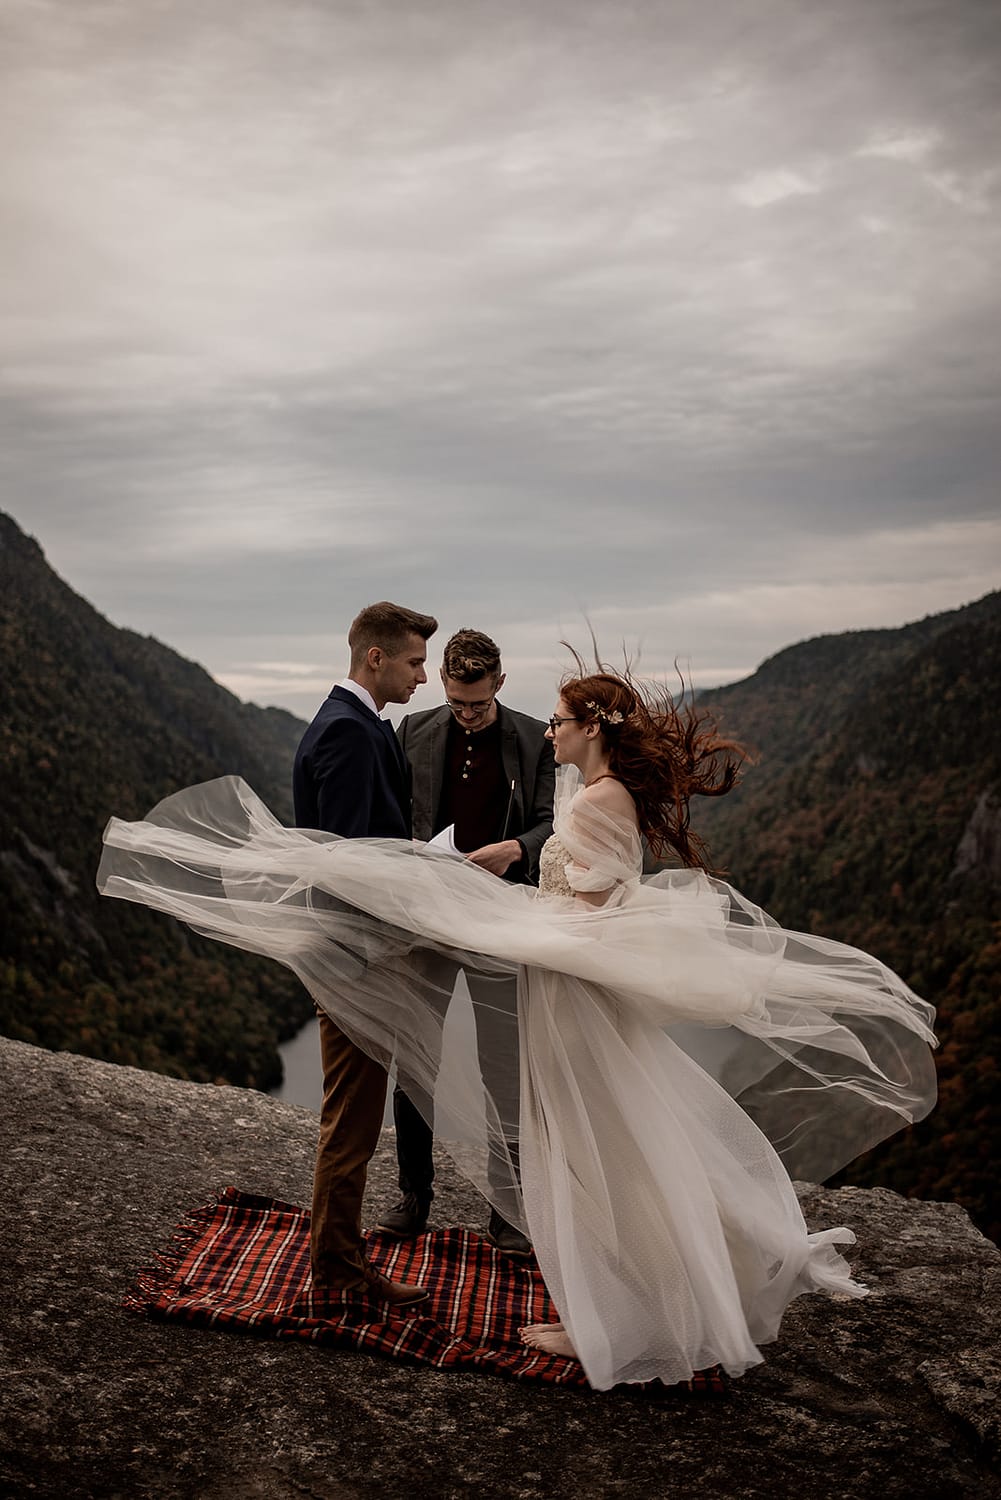 Mountaintop elopement in the ADKs on Indian Head, Keene Valley